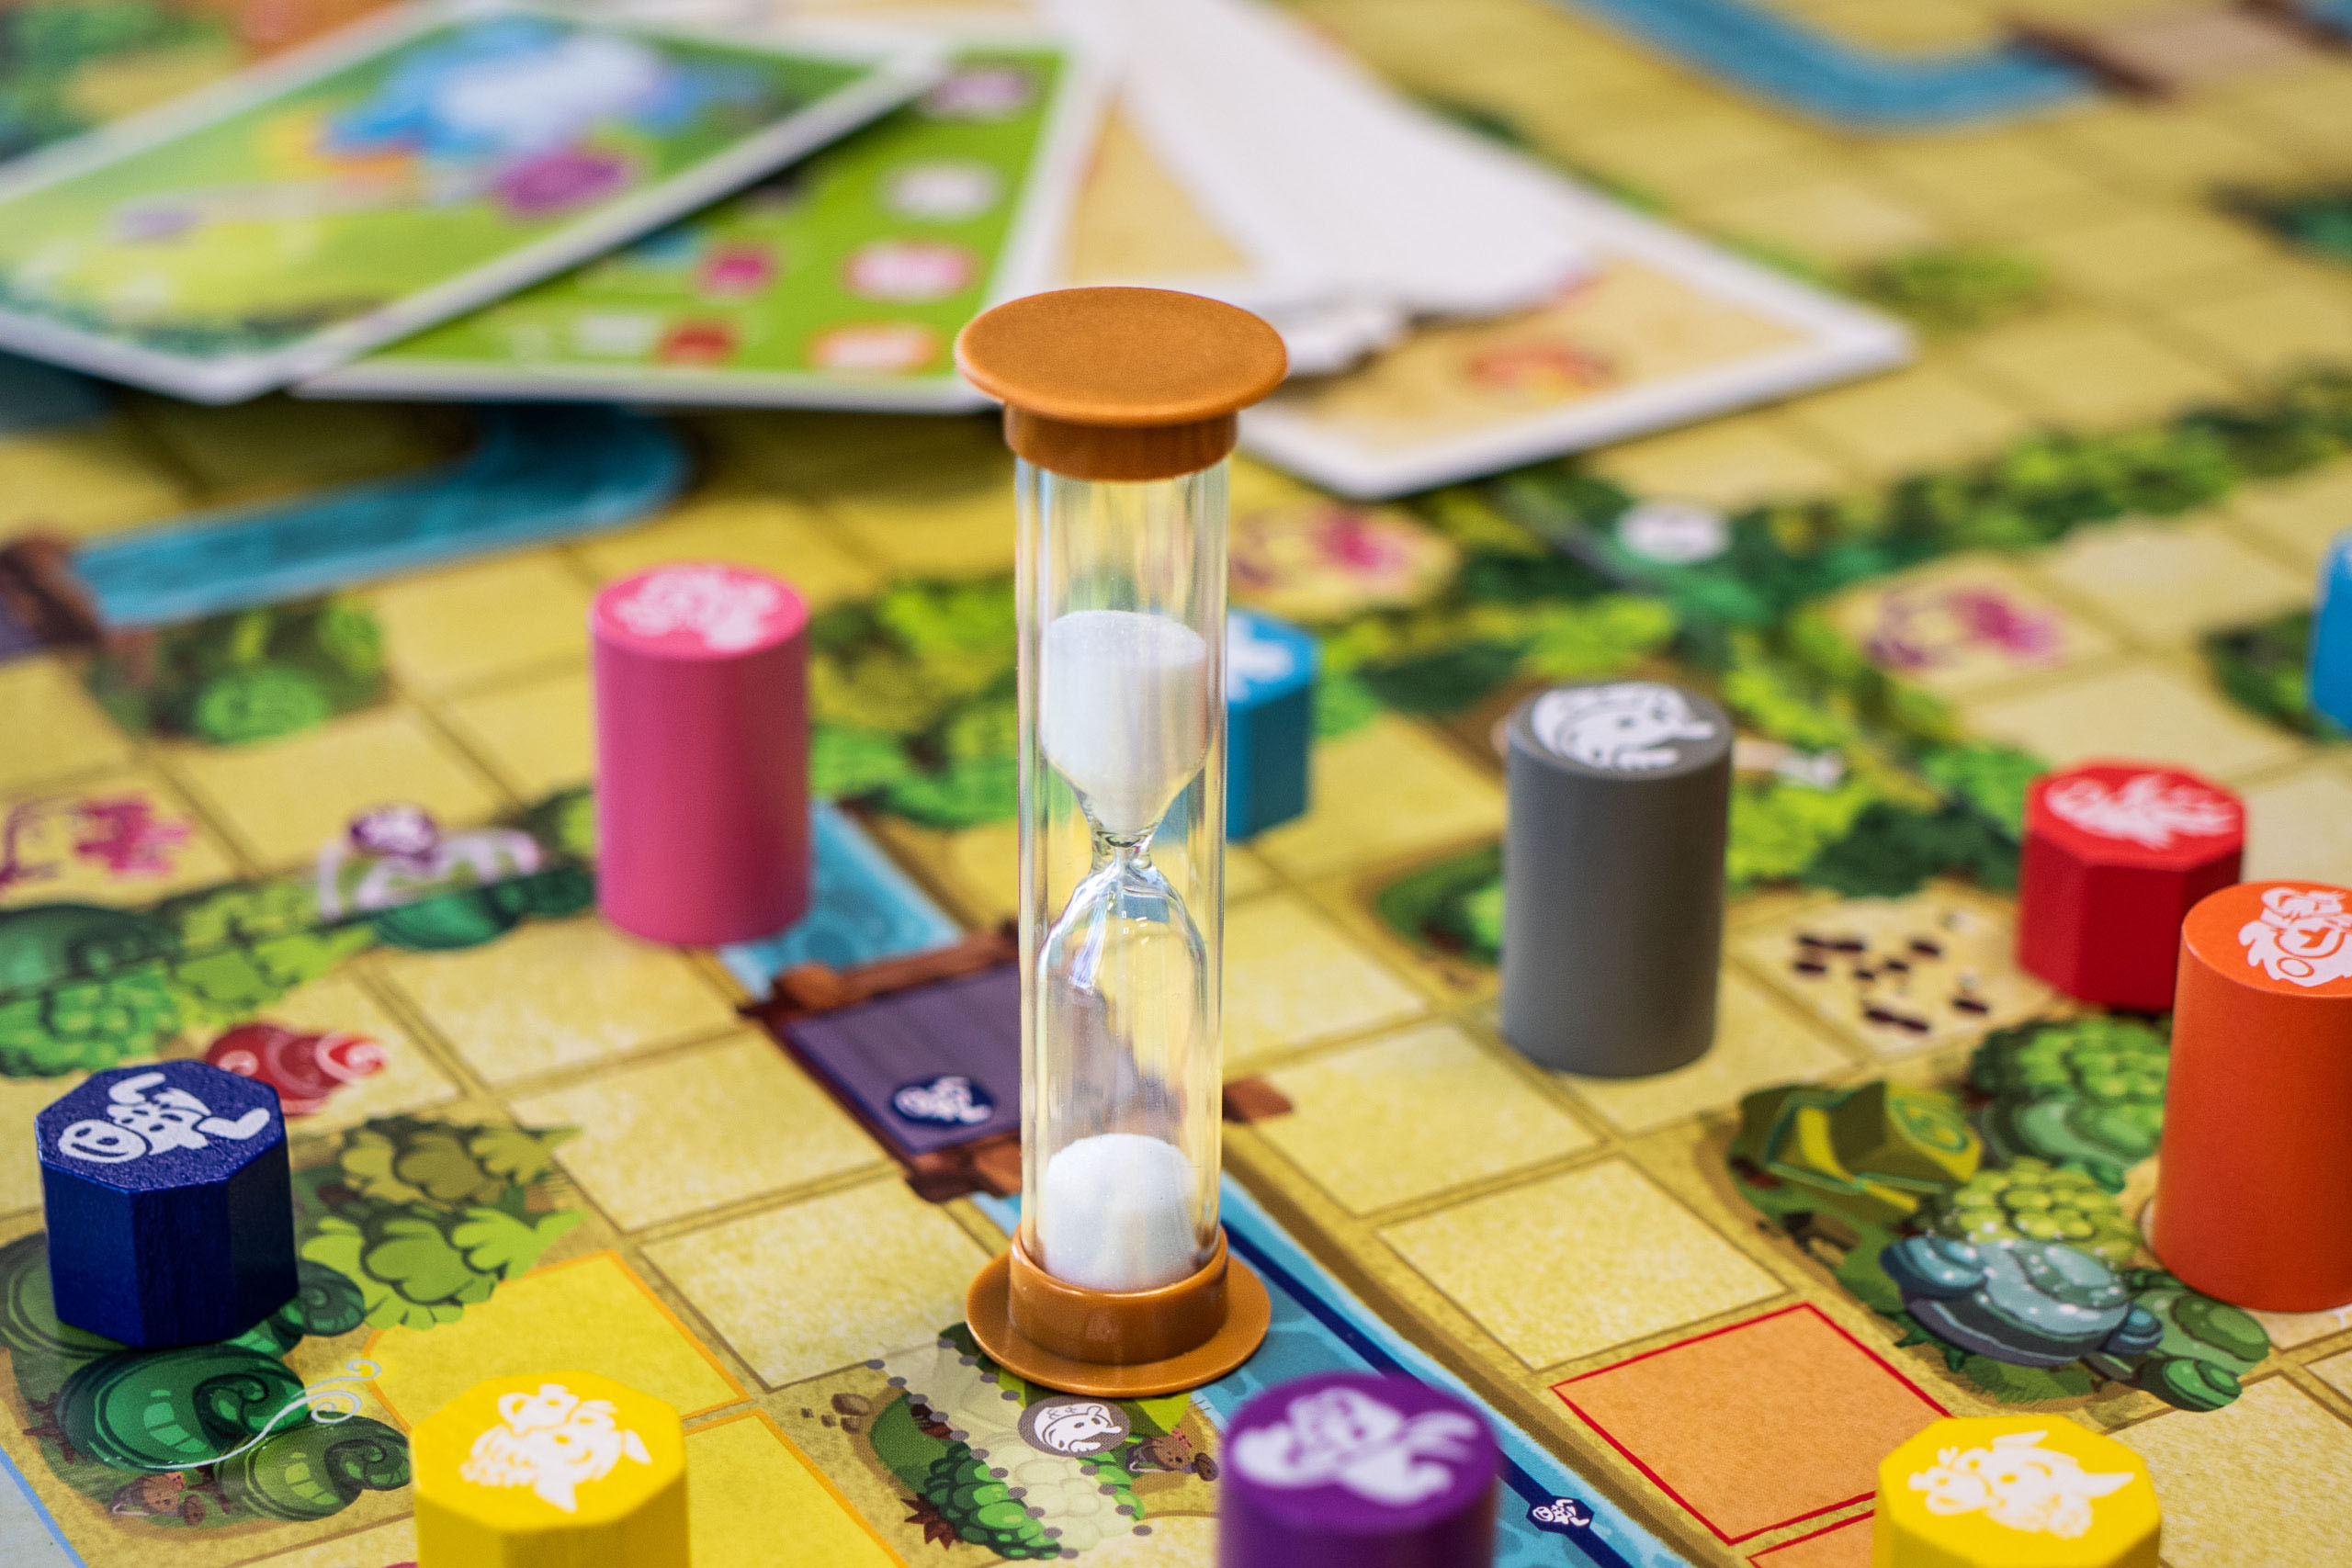 Whether you’re a Monopoly master or a Cluedo champion, come along to Sylvania Library for our monthly Board Game Swap and trade your pre-loved game with fellow gamers.